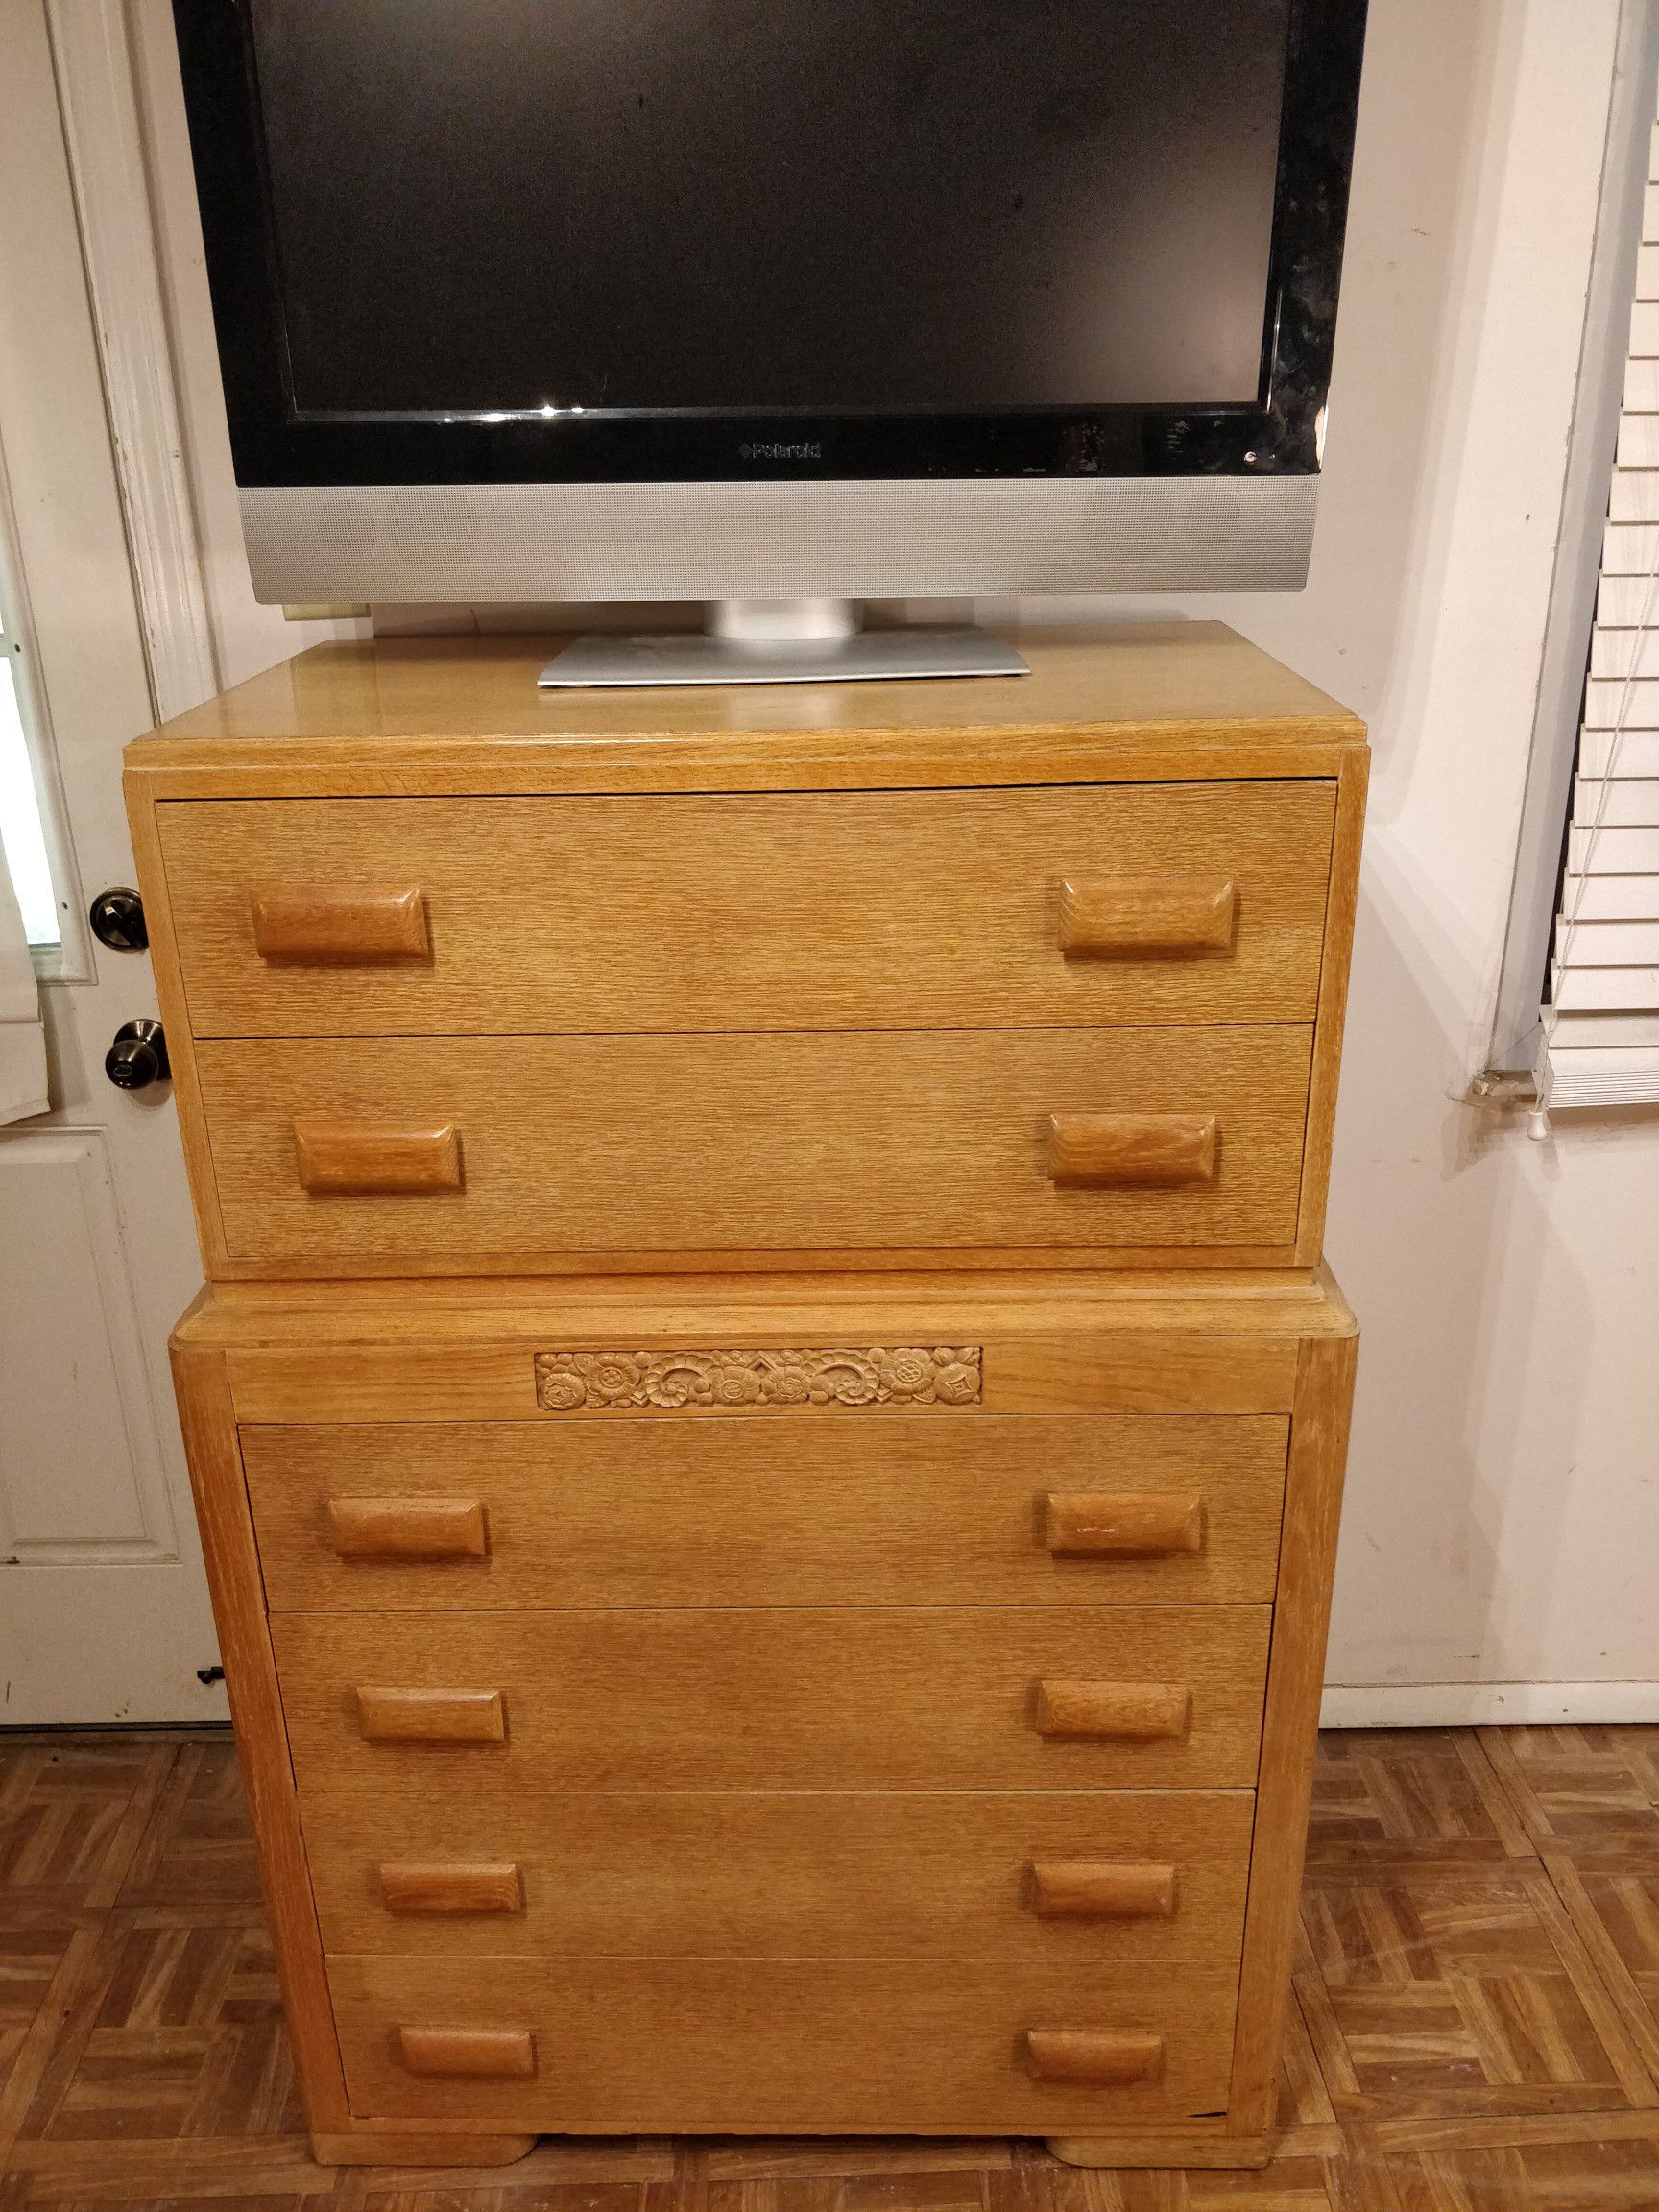 Solid wood chest dresser with big drawers in very good condition, all drawers sliding smoothly. L34.5"*W20"H50.5"